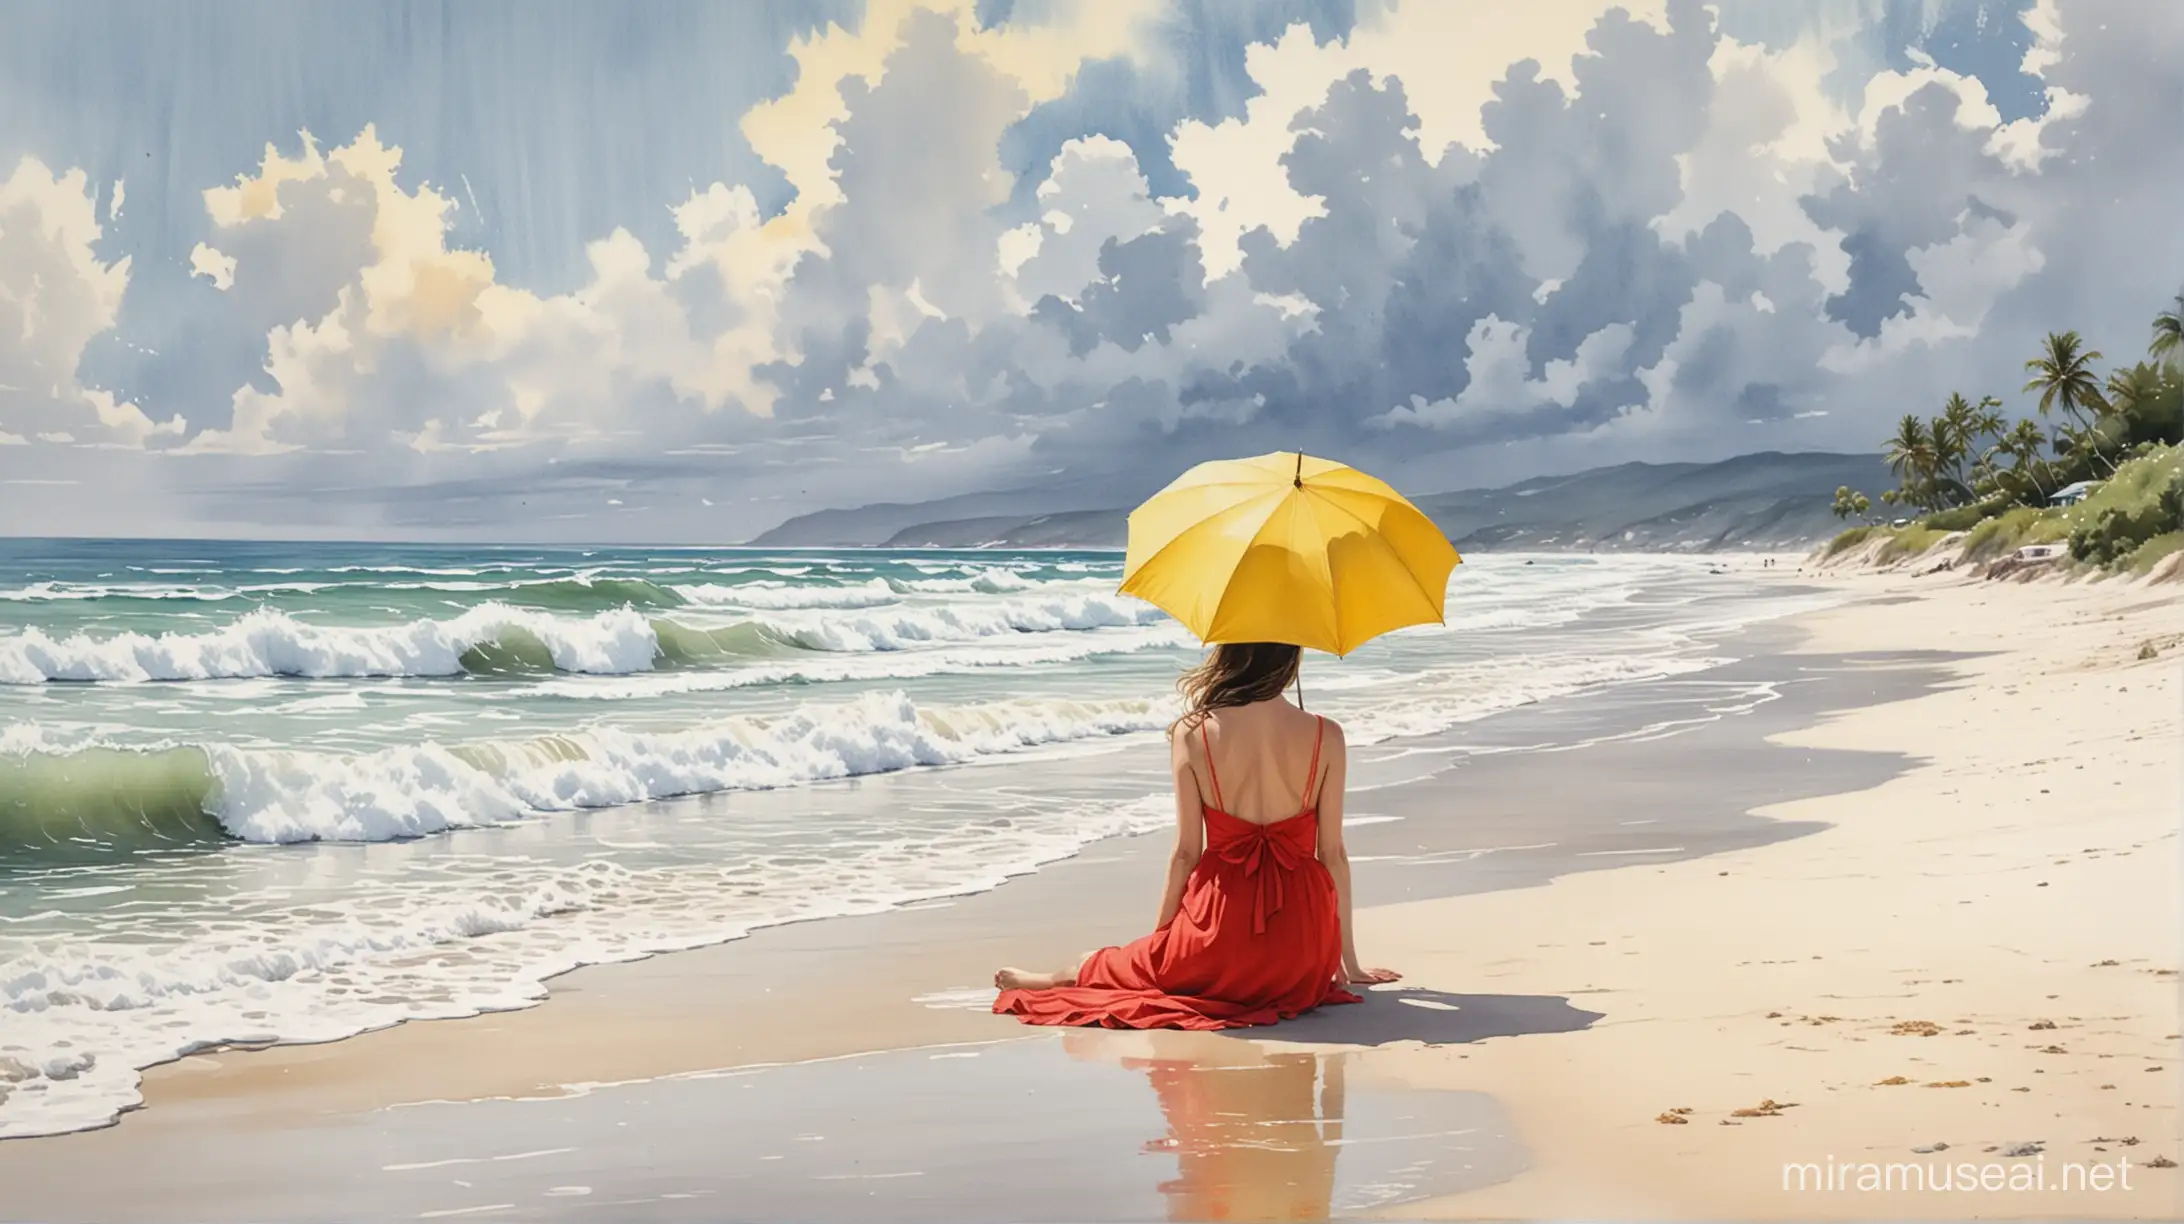 Oceanfront Serenity Woman in Red Dress with Yellow Umbrella on Sandy Beach